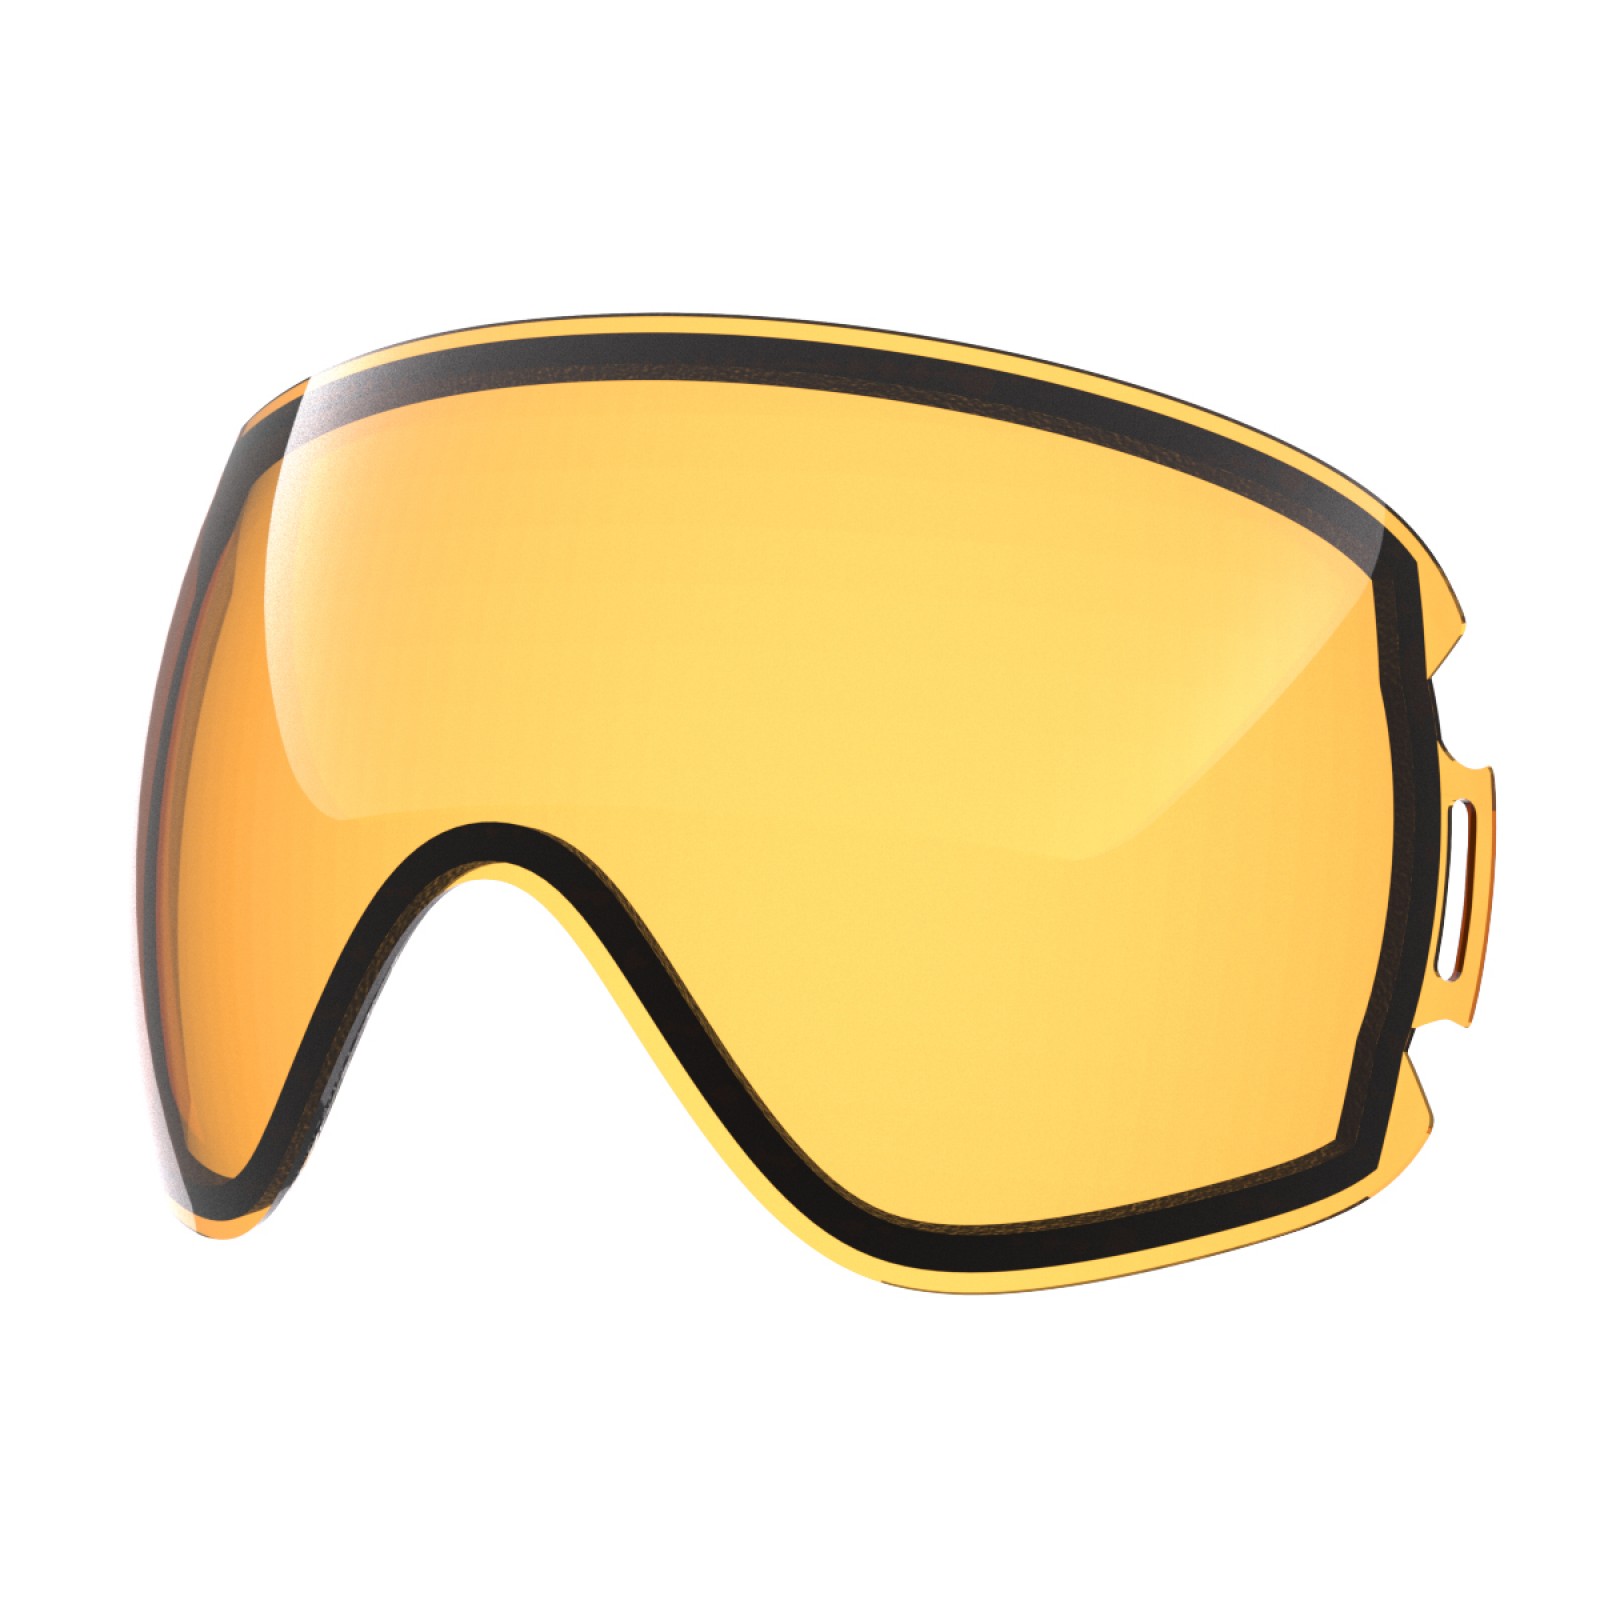 Persimmon lens for Open goggle